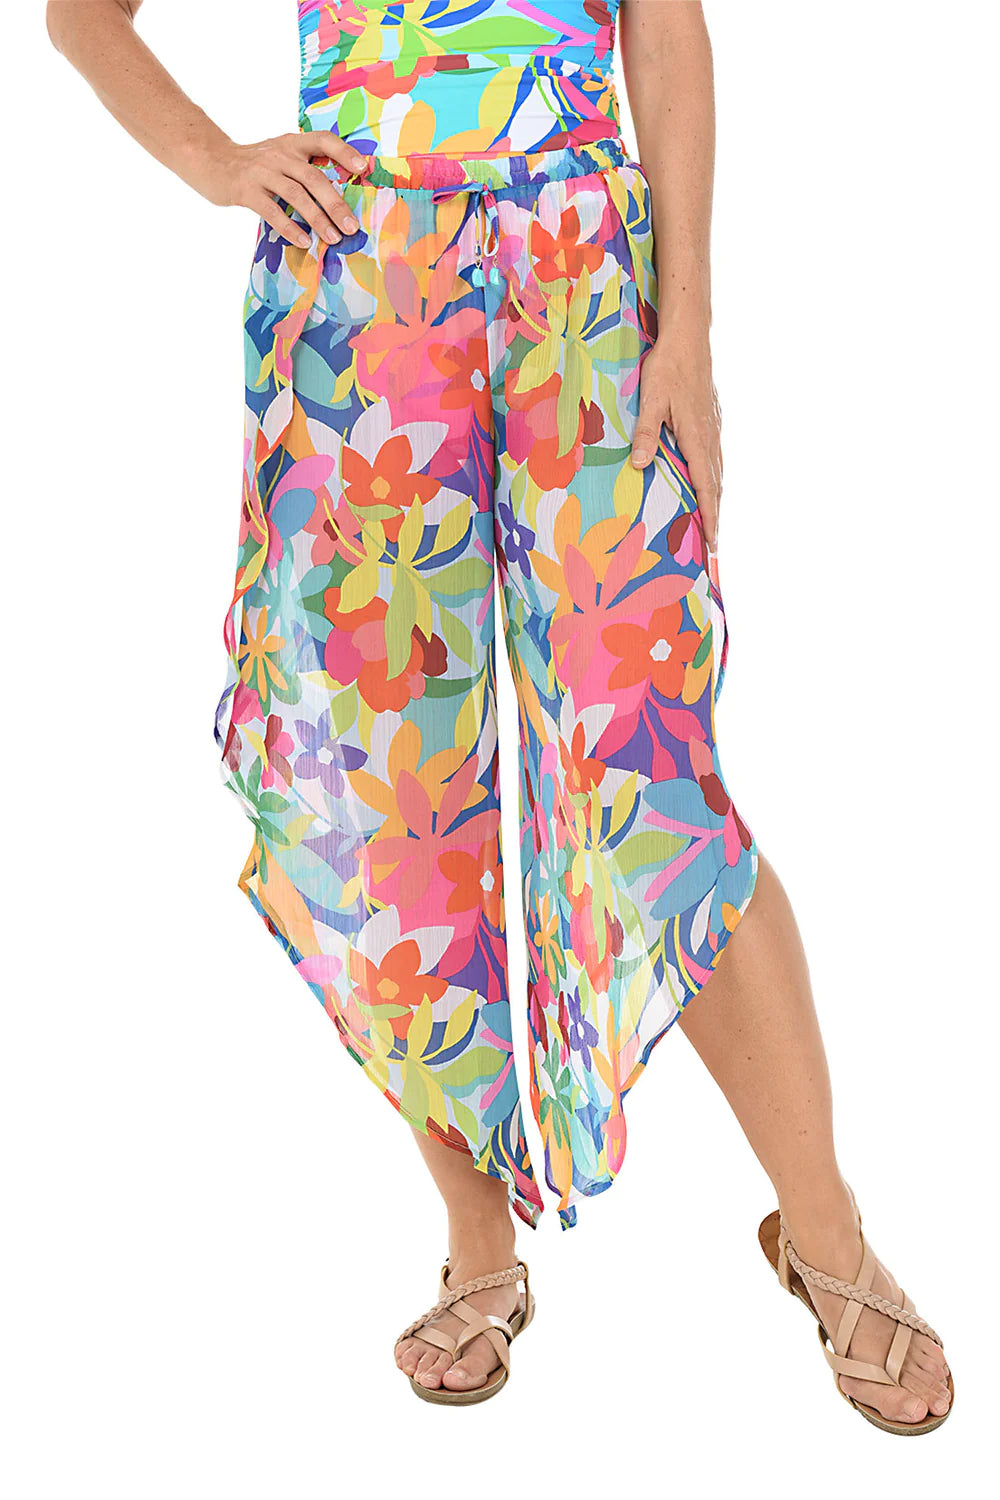 Bold Rush Caftan Swimsuit Cover Up